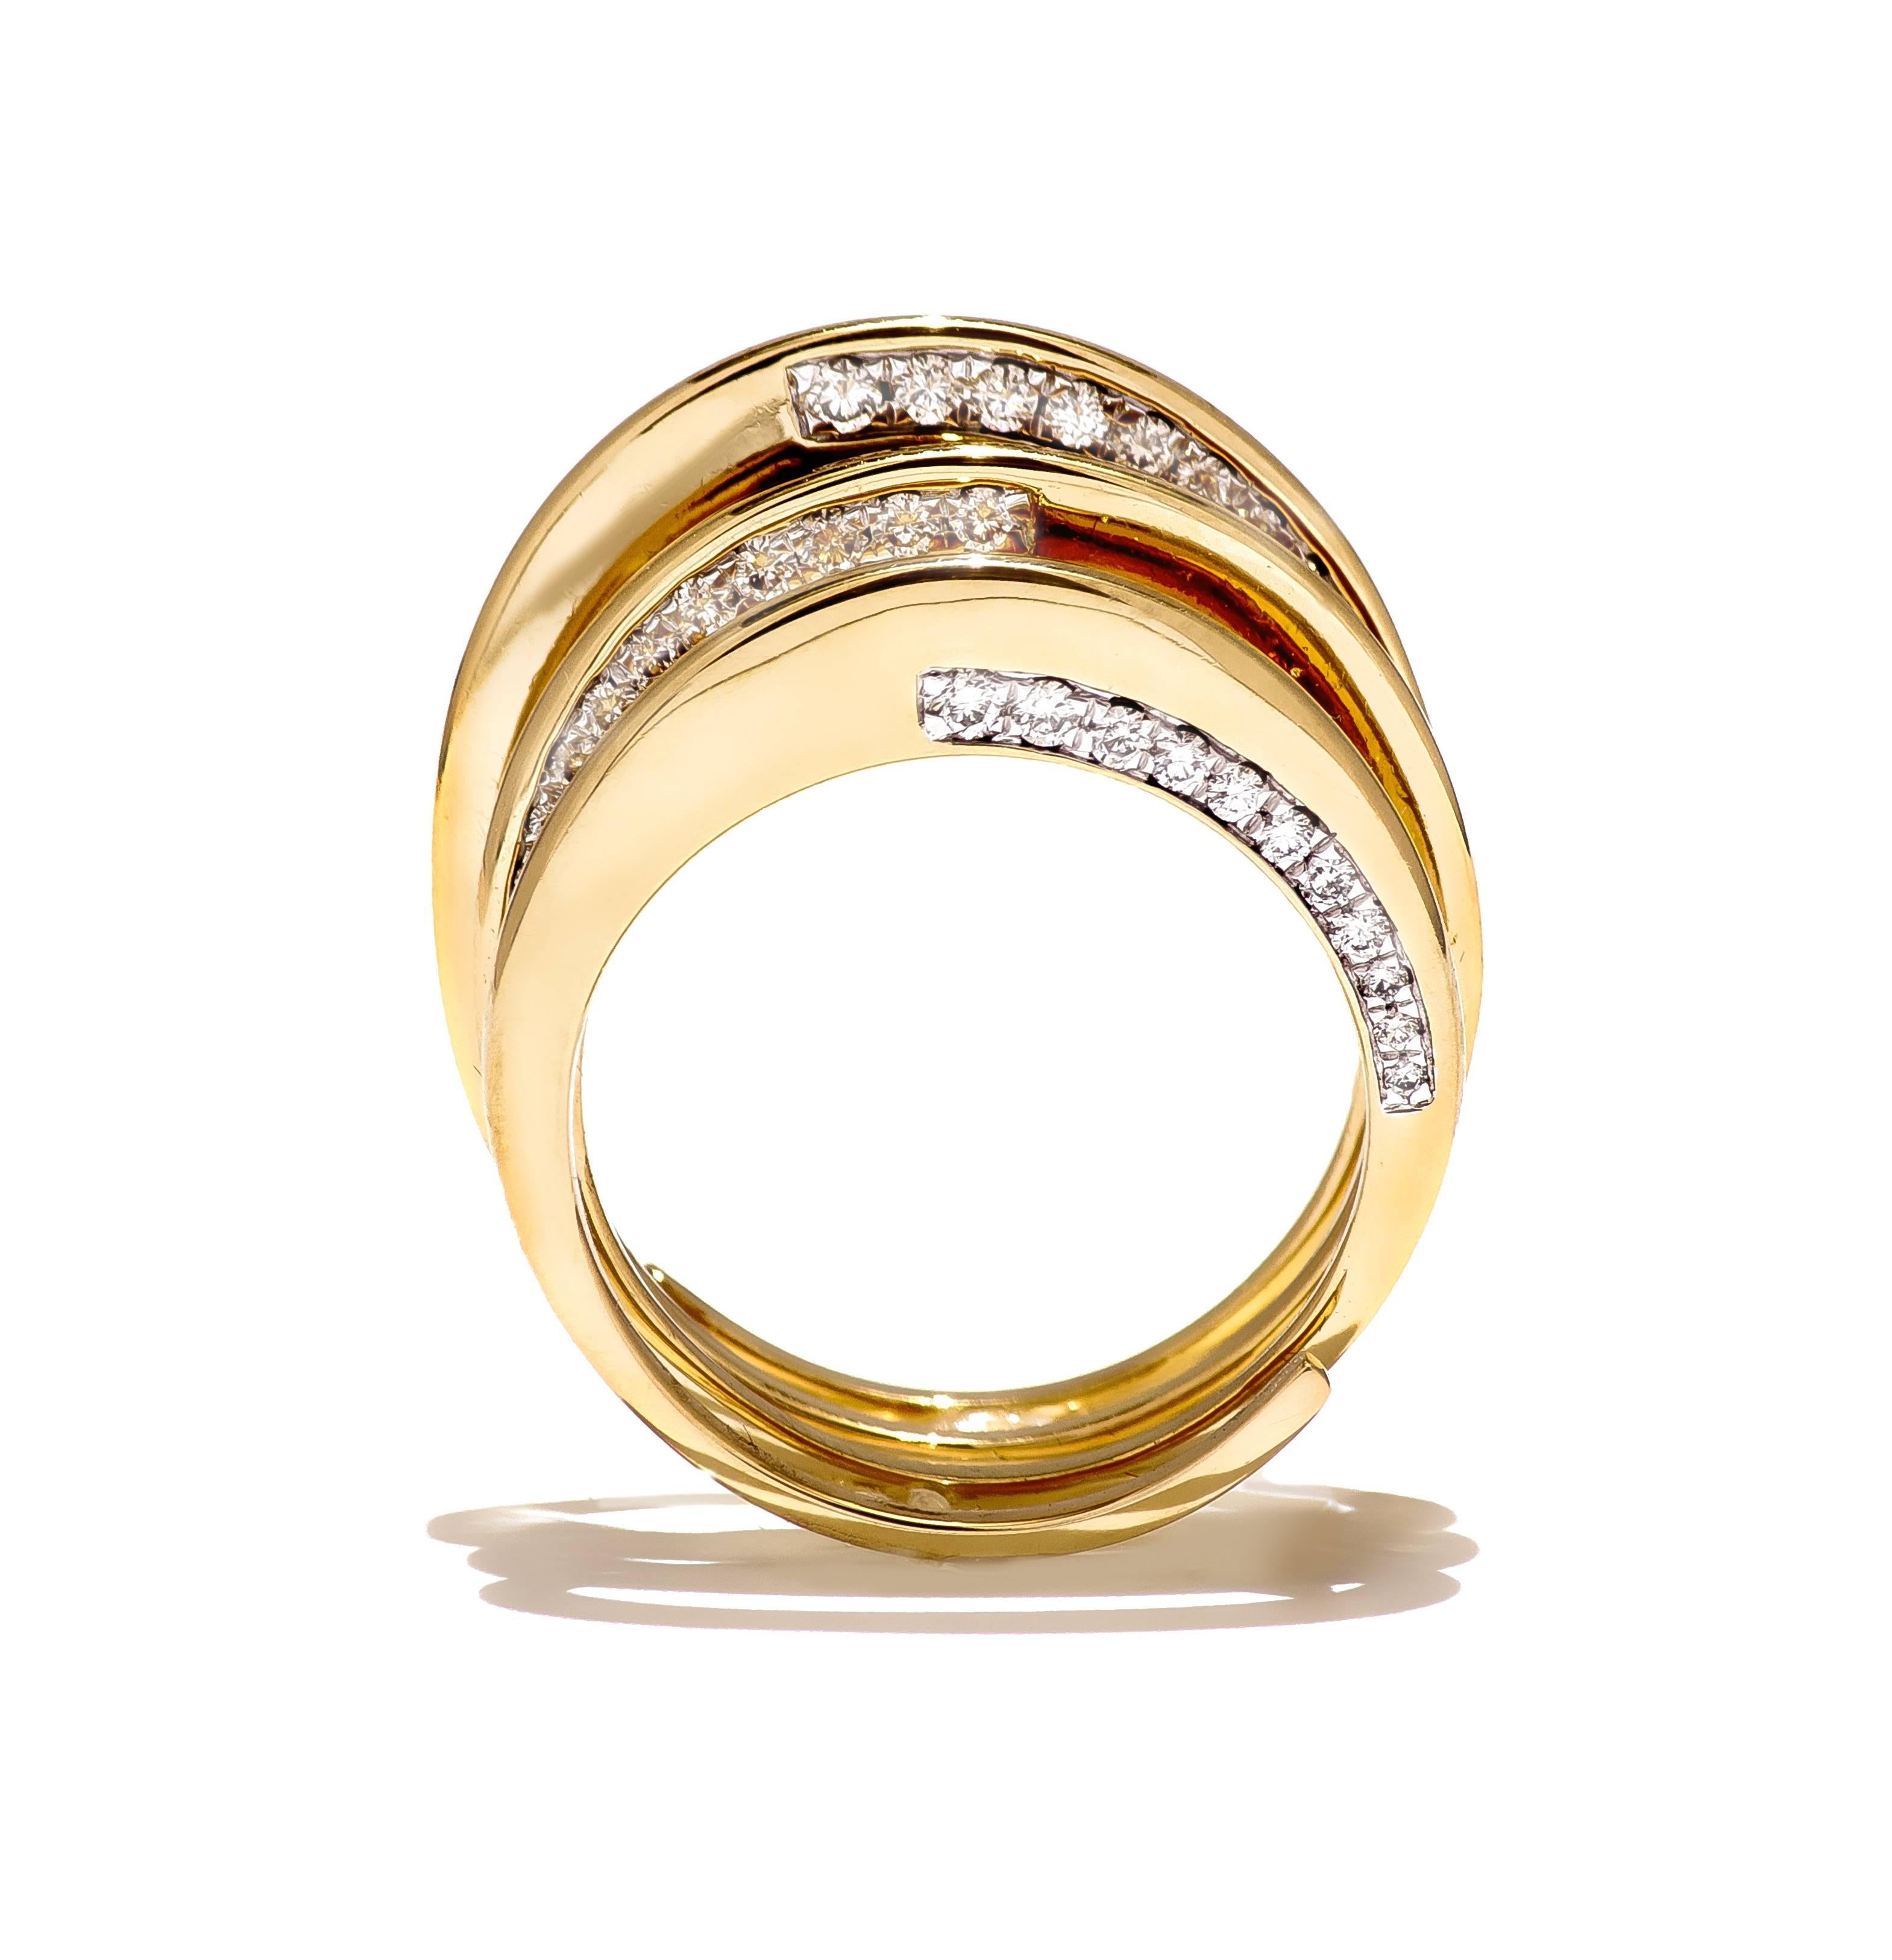 18K yellow gold full cut round diamonds 0.42 ctw, Unique spiral ring, that looks different from every angle when worn. 
Ring size US 7 (Alternative sizes available on a made to order basis, with an estimated delivery time of 4 weeks) Signed by M.